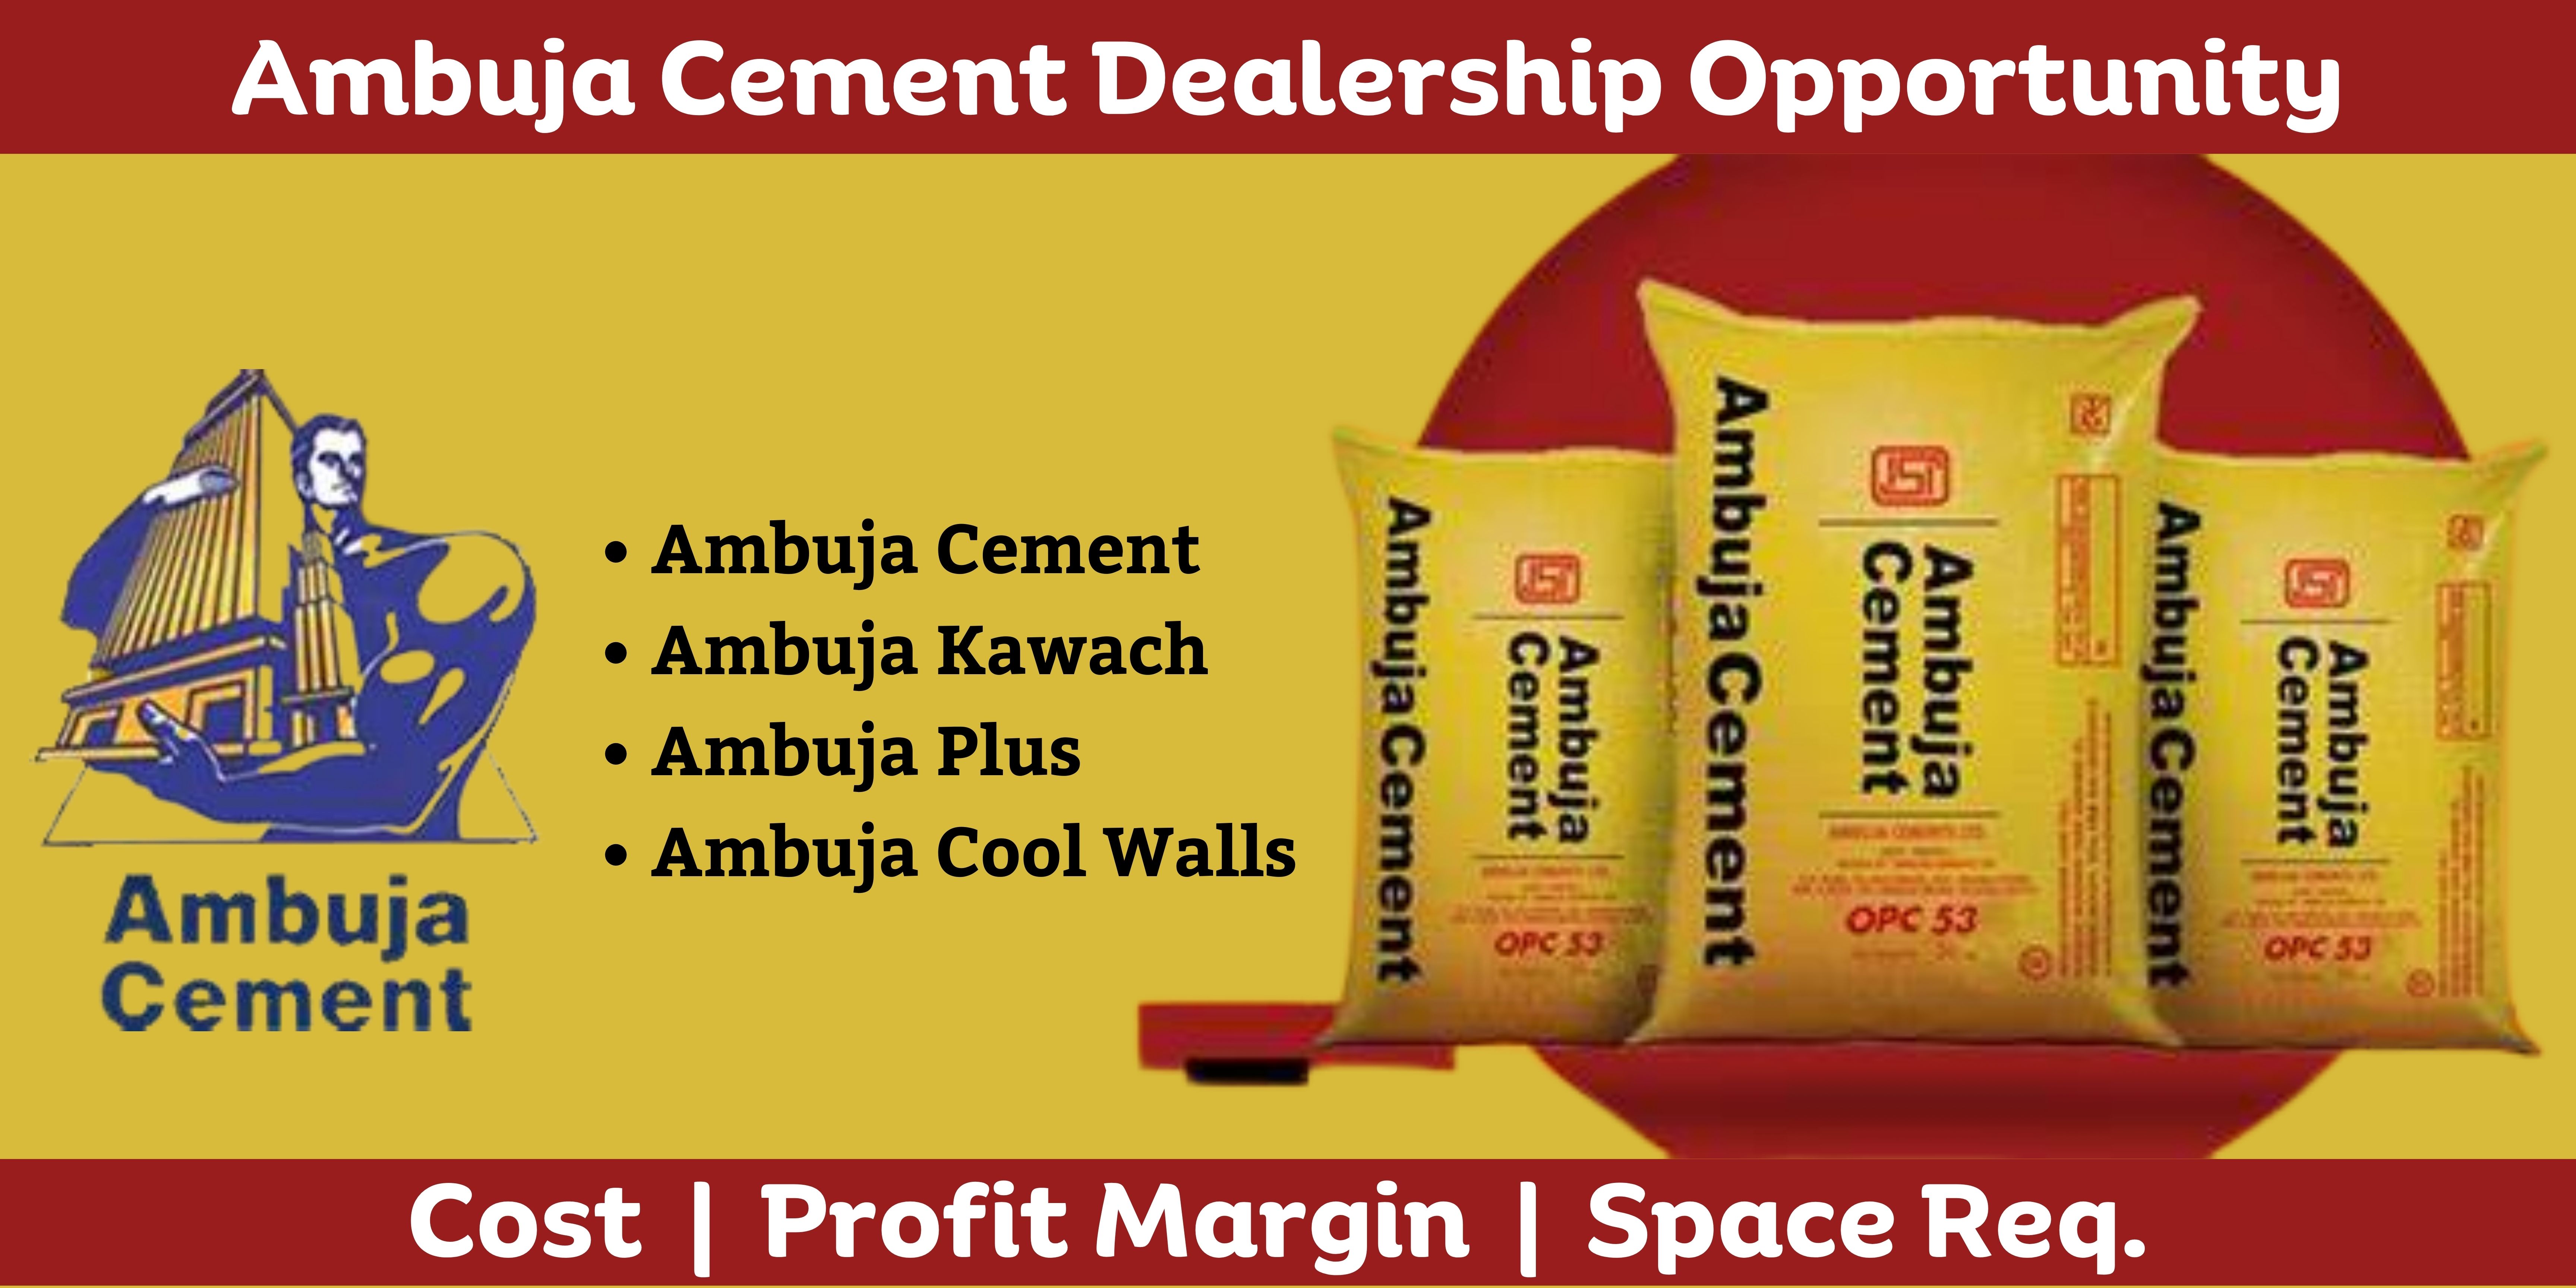 Ambuja Cement Dealership Opportunity